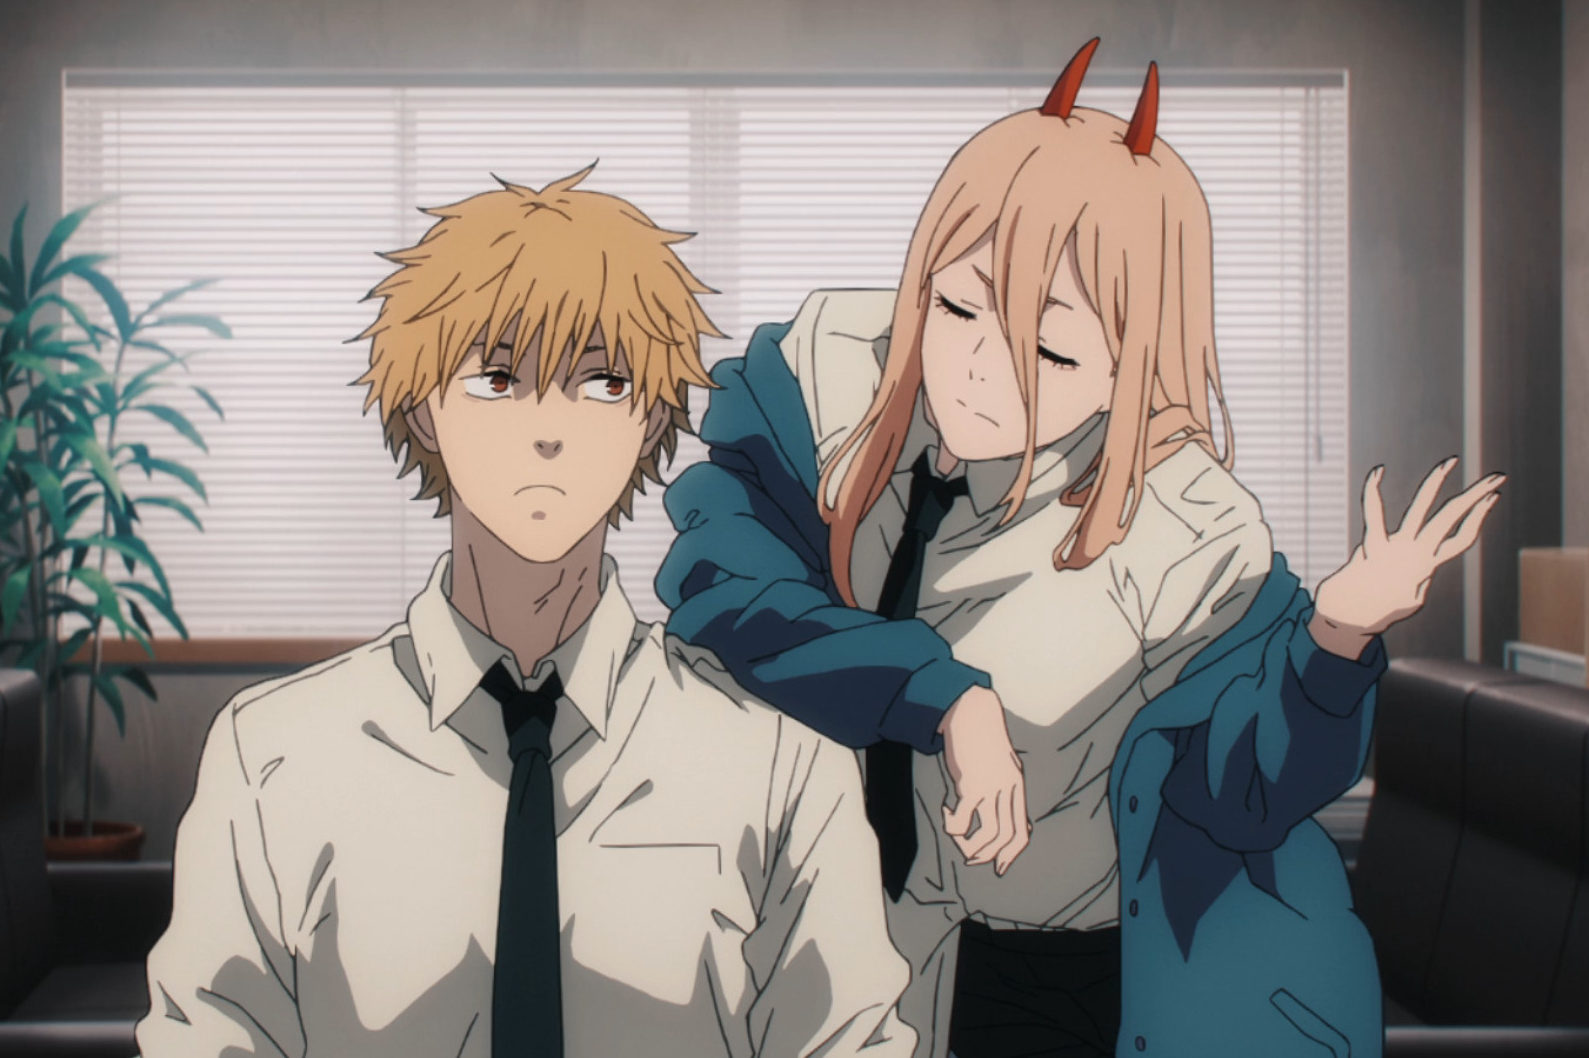 Chainsaw Man Episode 3 Review/Recap: Justice For Meowy - The Game of Nerds